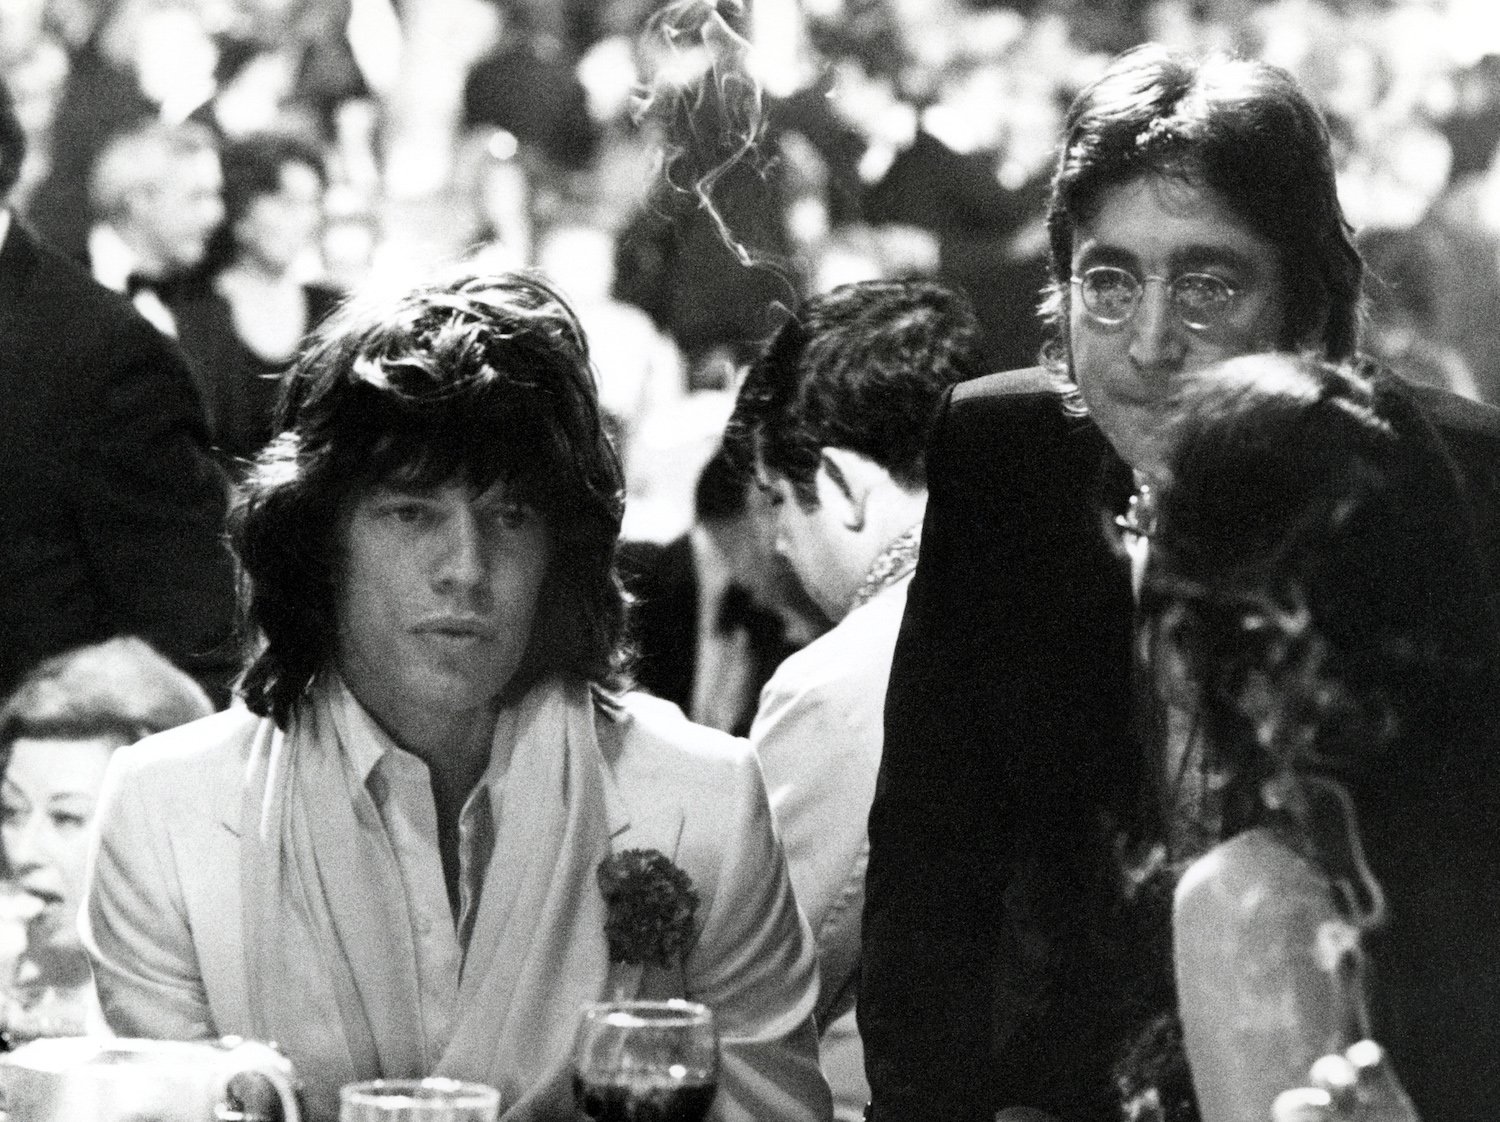 Mick Jagger, John Lennon, and May Pang at the American Film Institute Salute to James Cagney